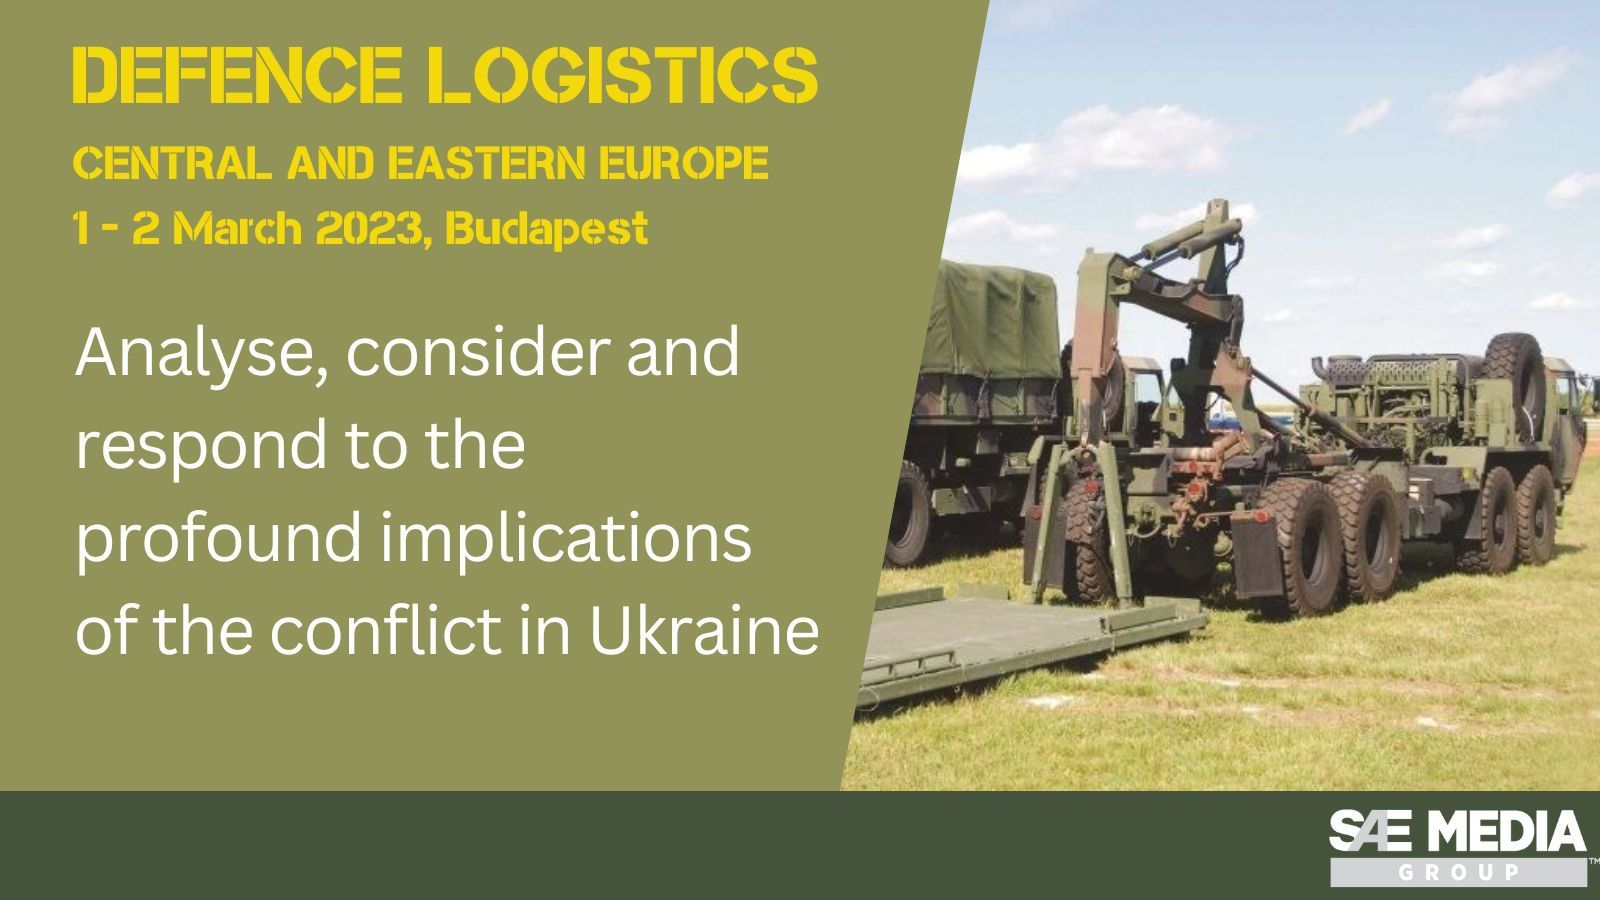 Defence Logistics Central and Eastern Europe Conference: 1-2 March 2023, Budapest, Hungary, Budapest, Hungary